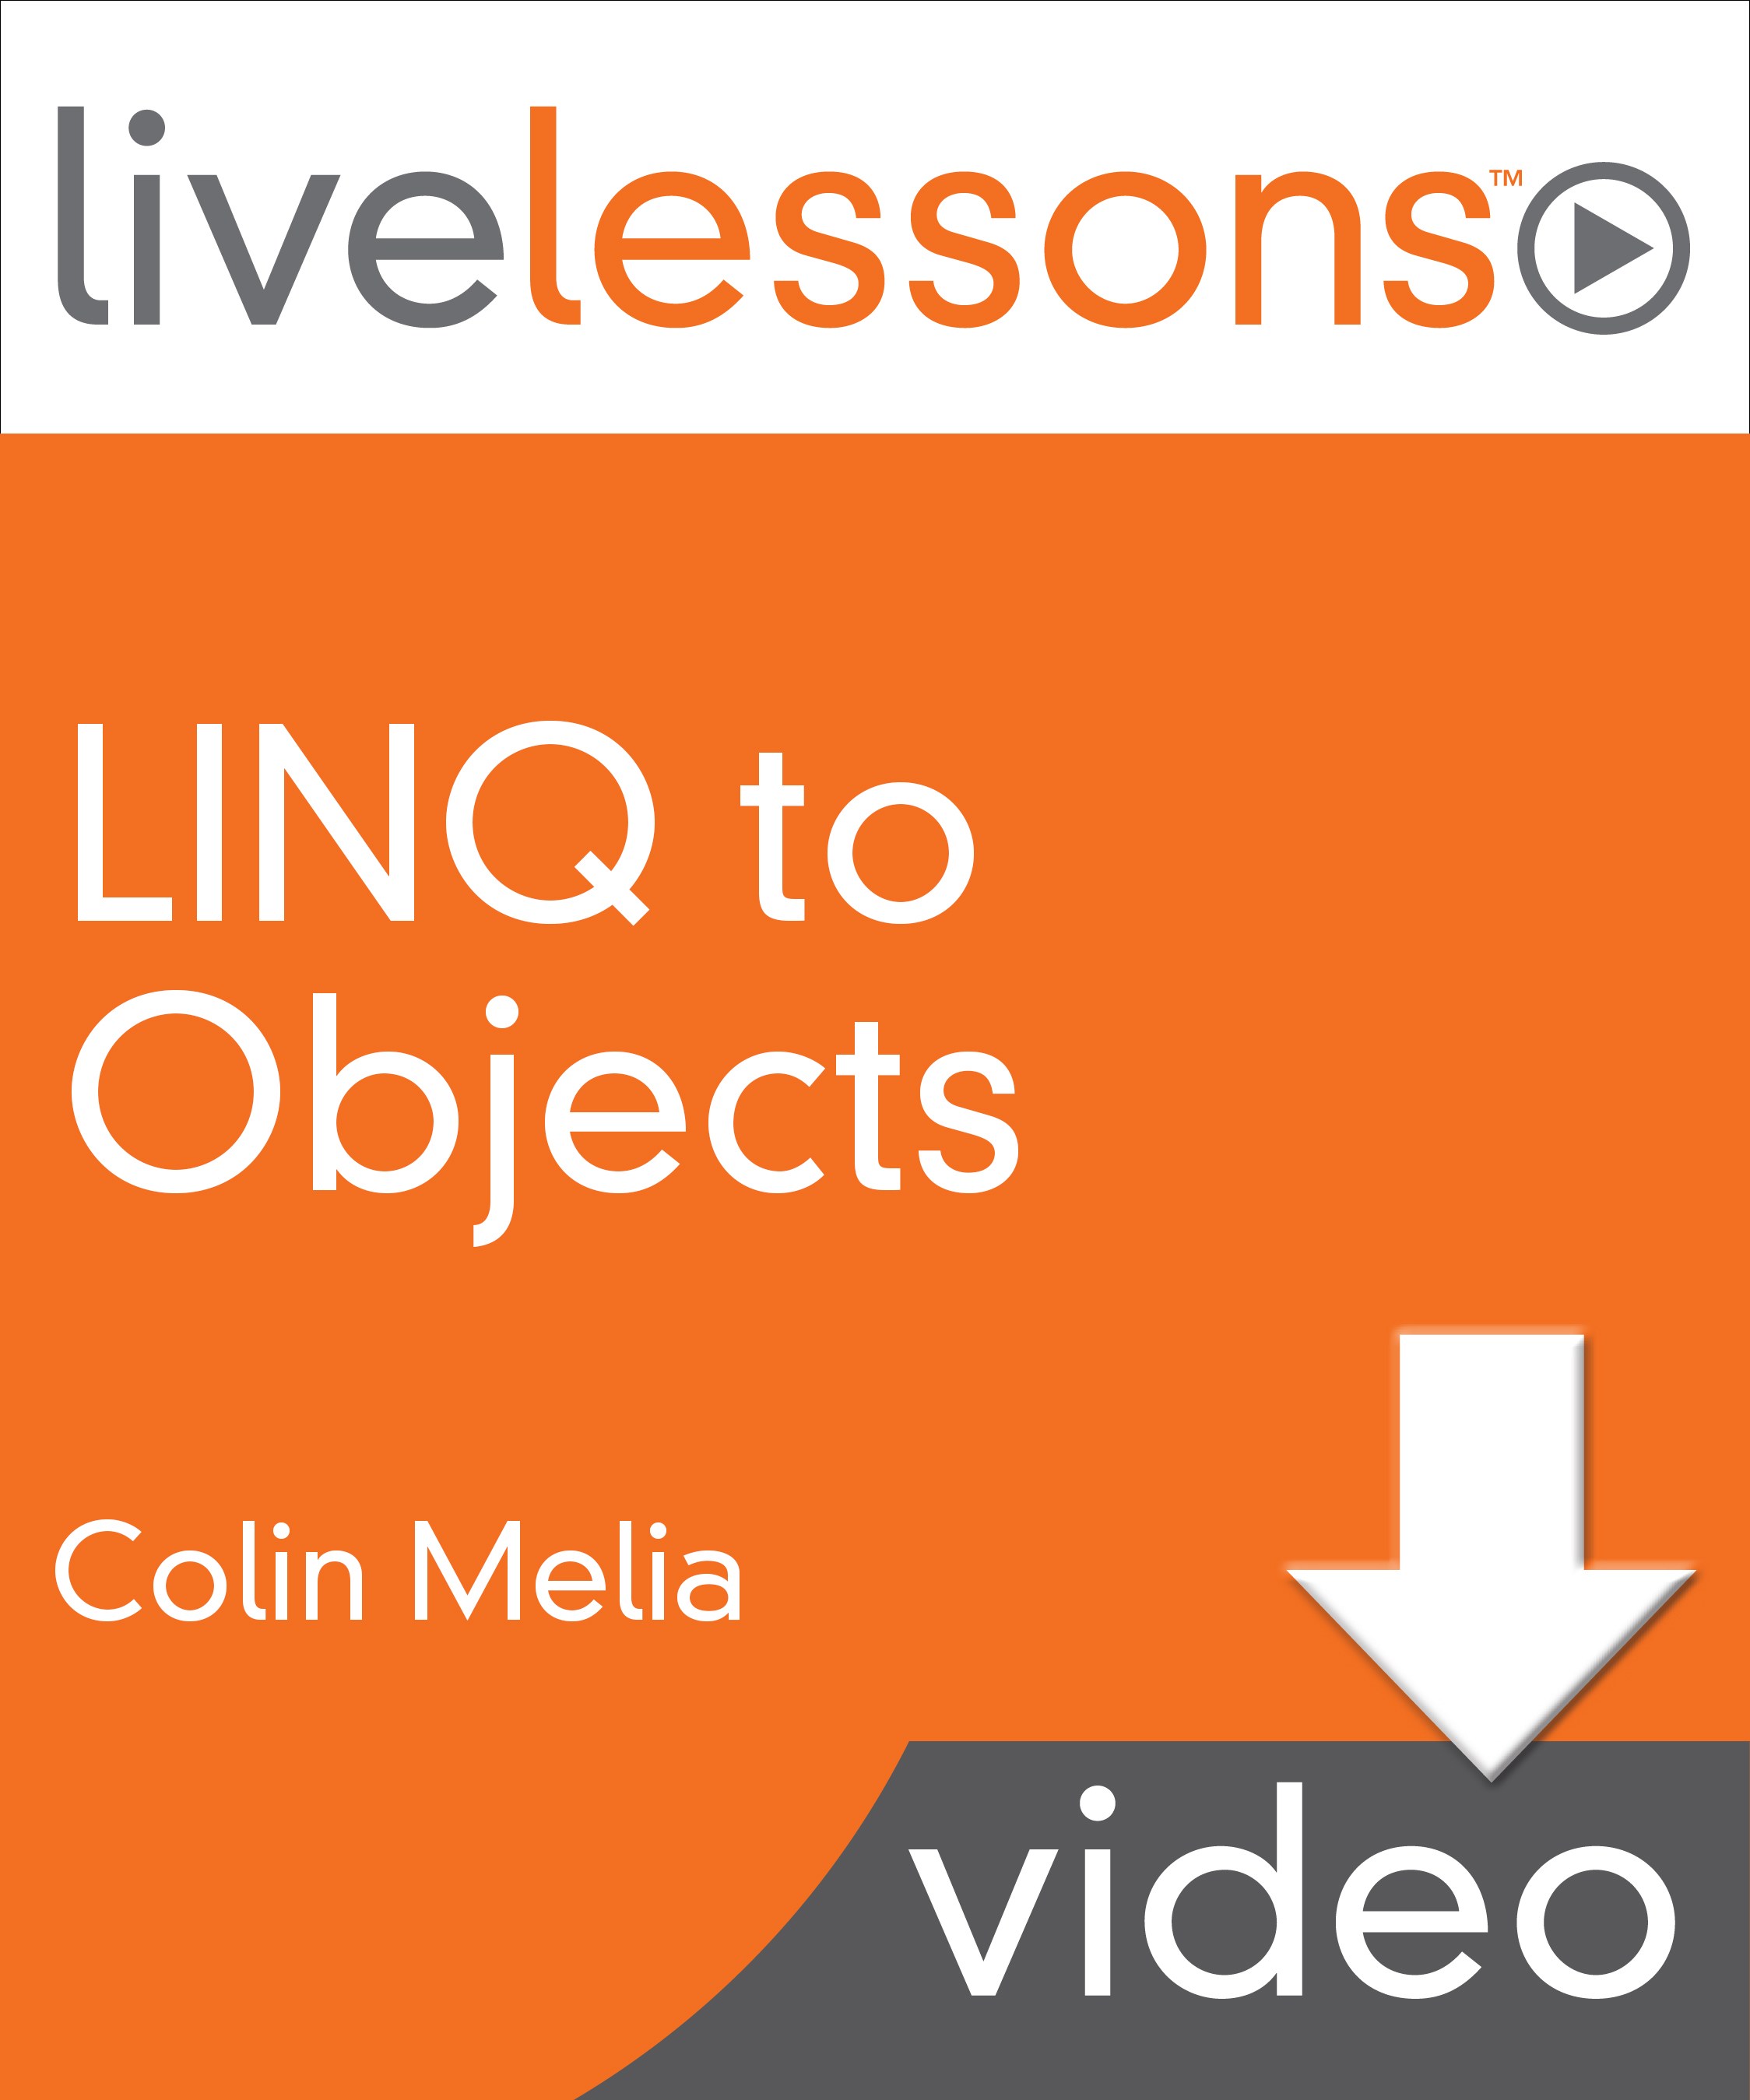 LINQ to Objects LiveLessons, Downloadable Video